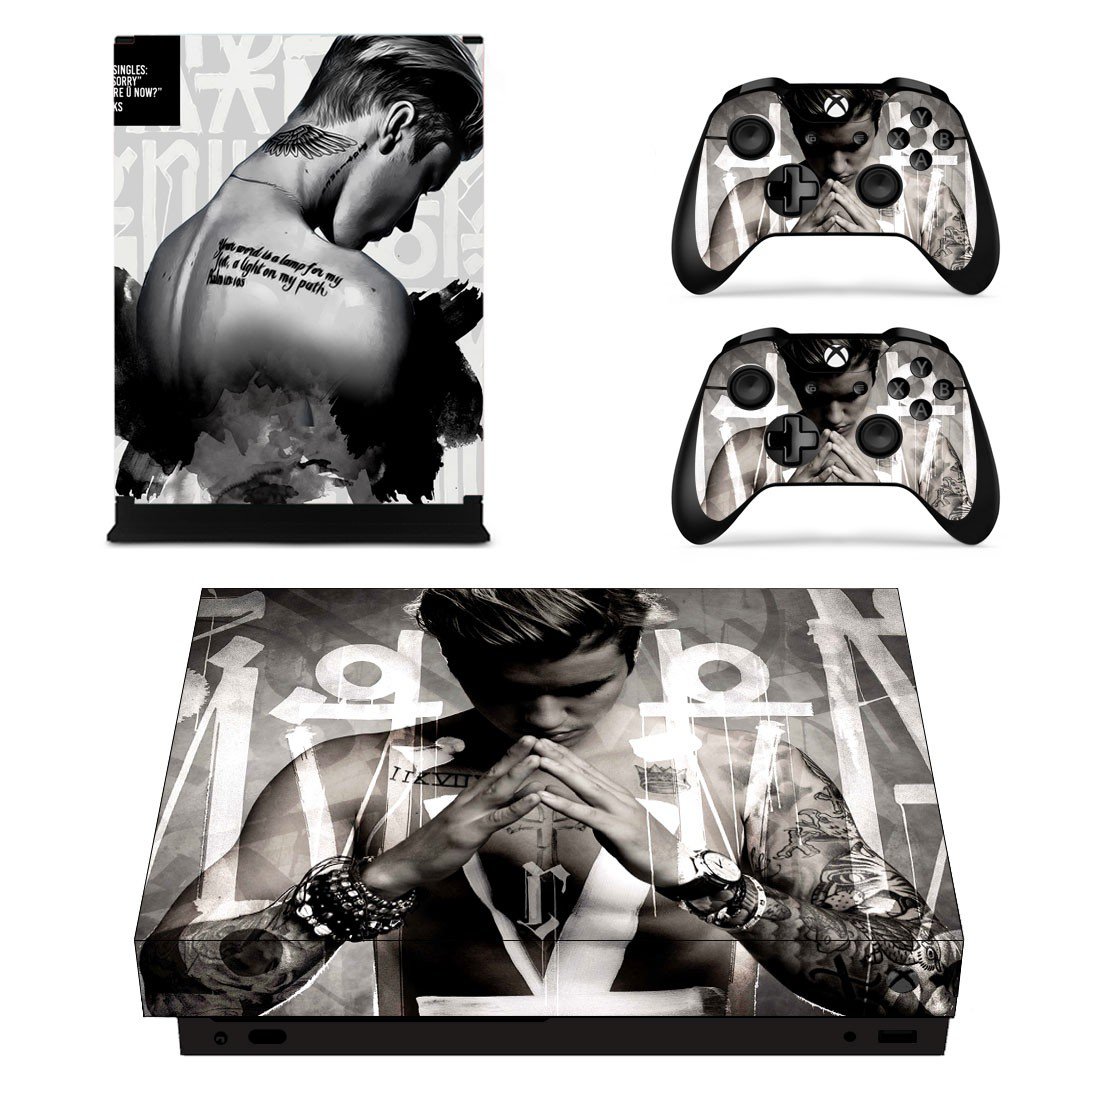 Justin Bieber Skin Sticker Decal for Xbox One X Controllers